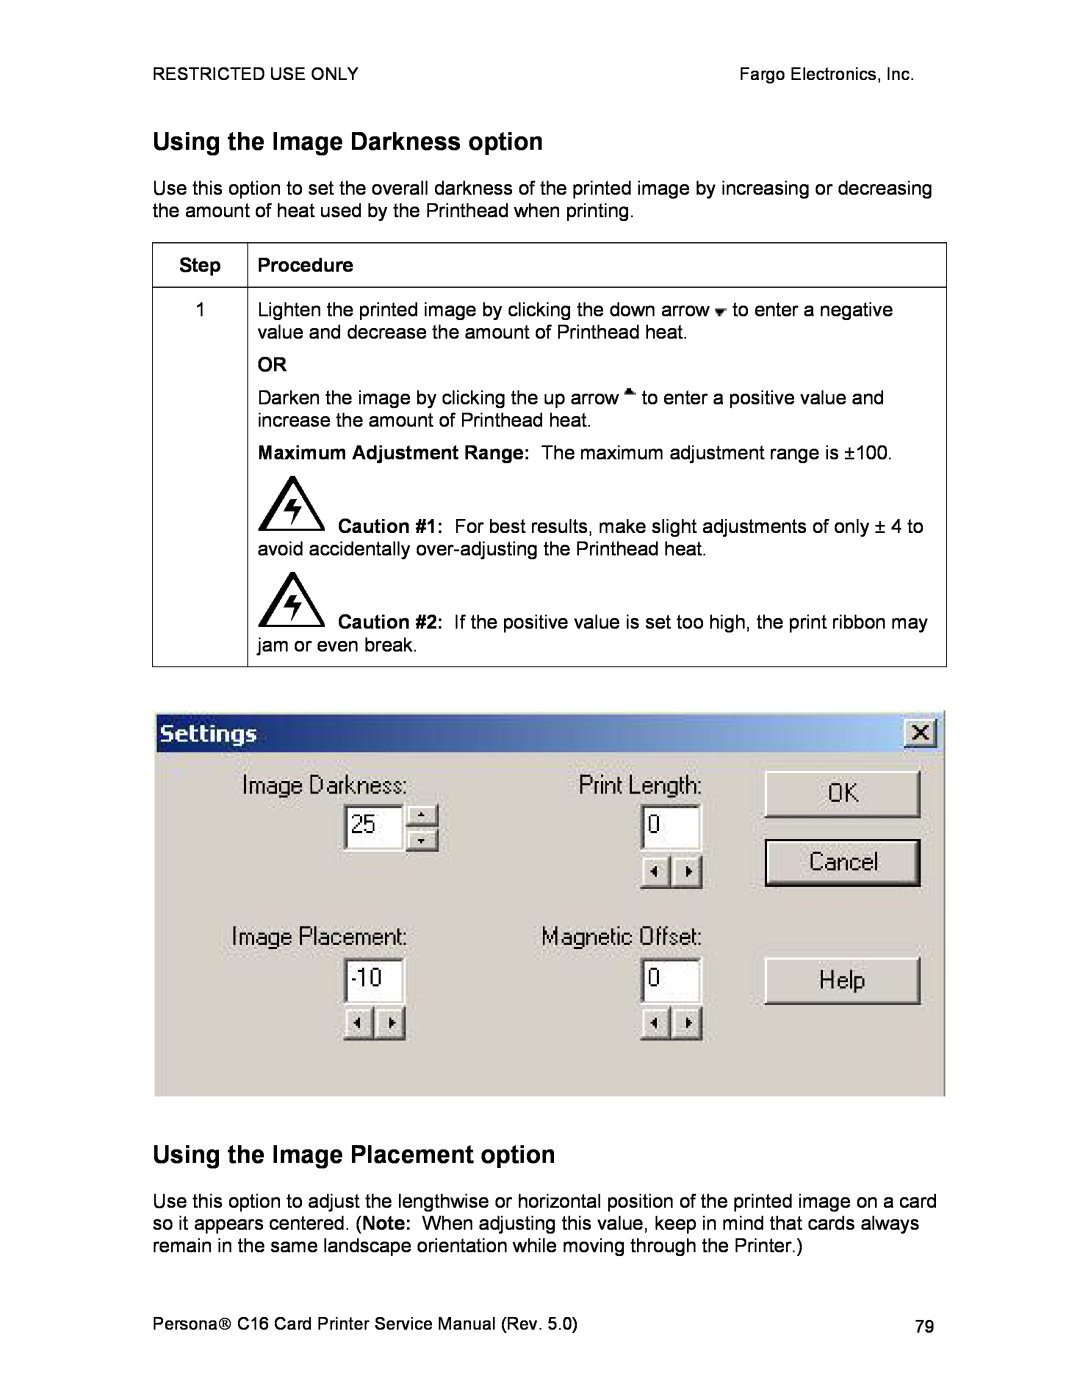 FARGO electronic C16 service manual Using the Image Darkness option, Using the Image Placement option 